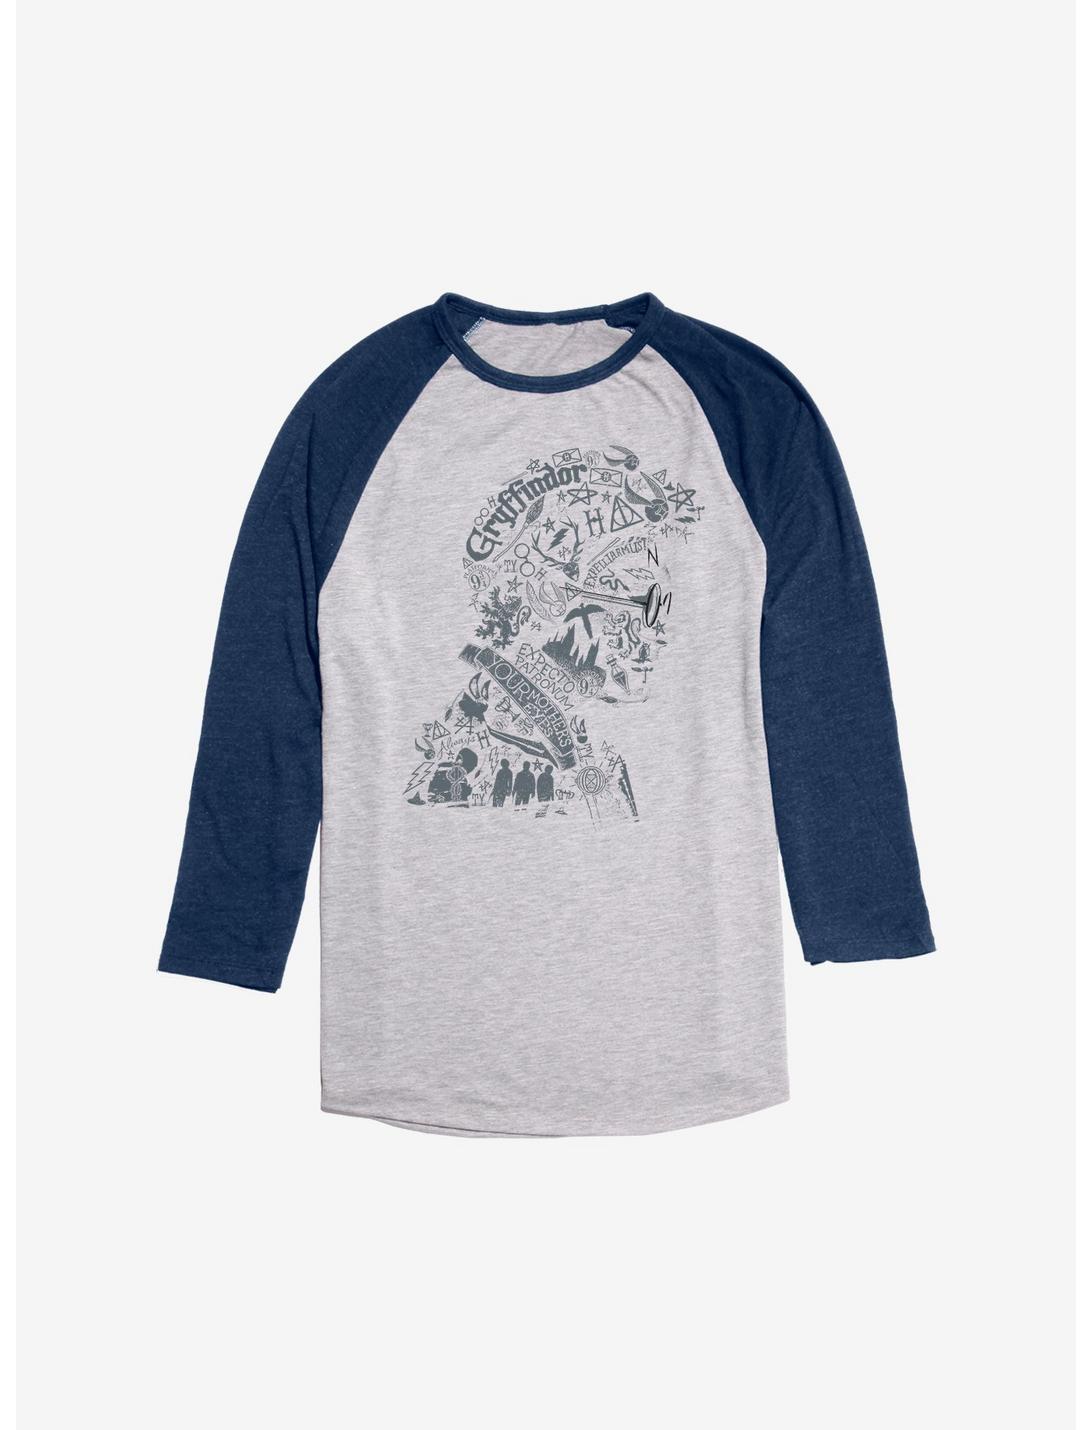 Harry Potter Portrait Fill Raglan, Ath Heather With Navy, hi-res